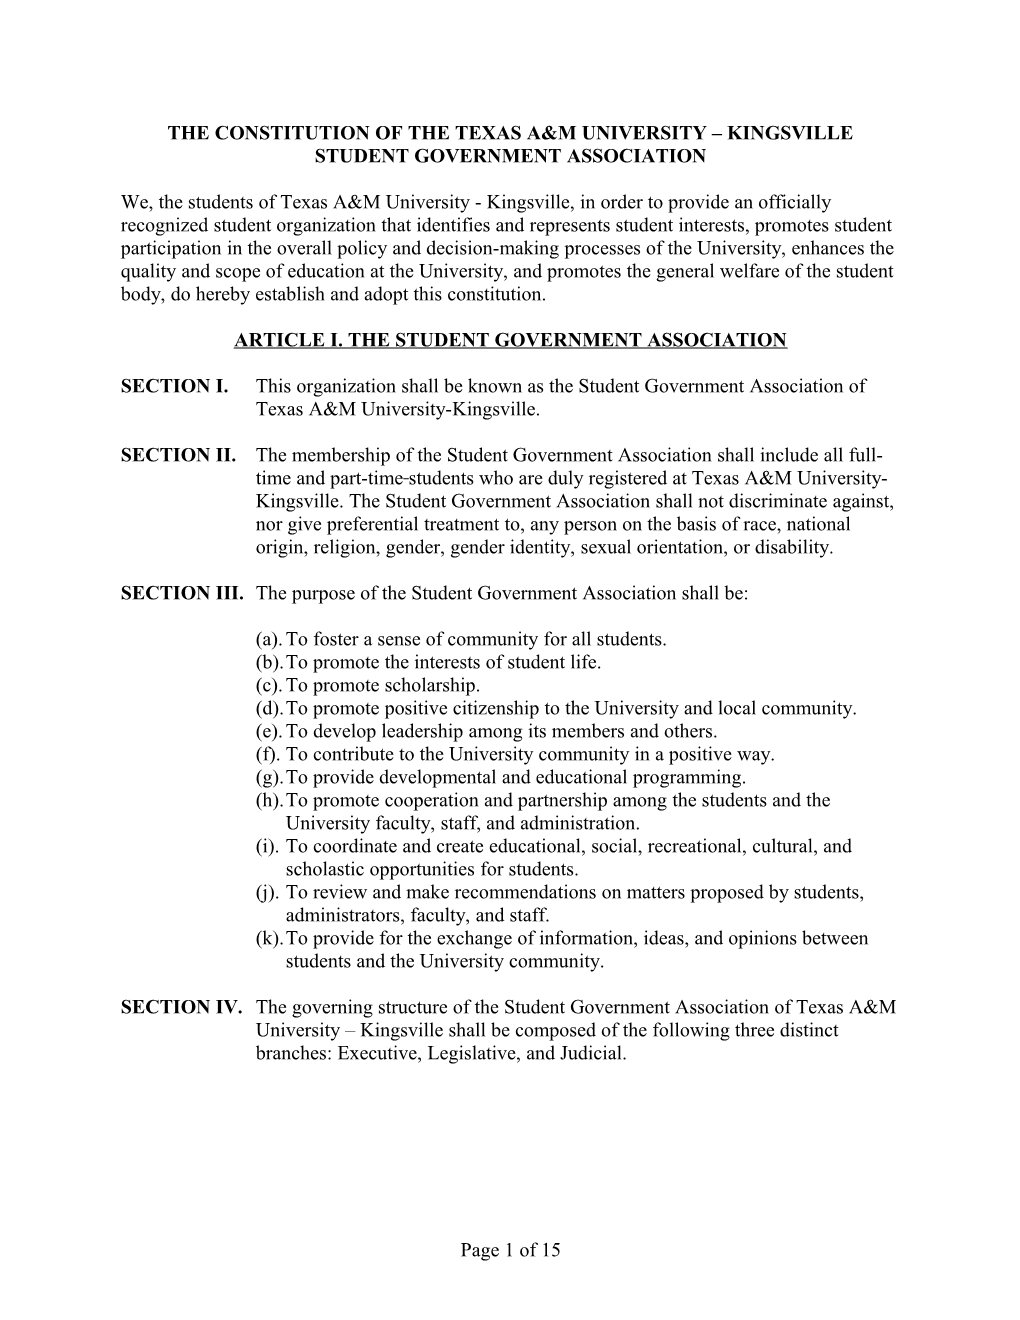 The Constitution of the Texas A&M University Kingsville Student Government Association